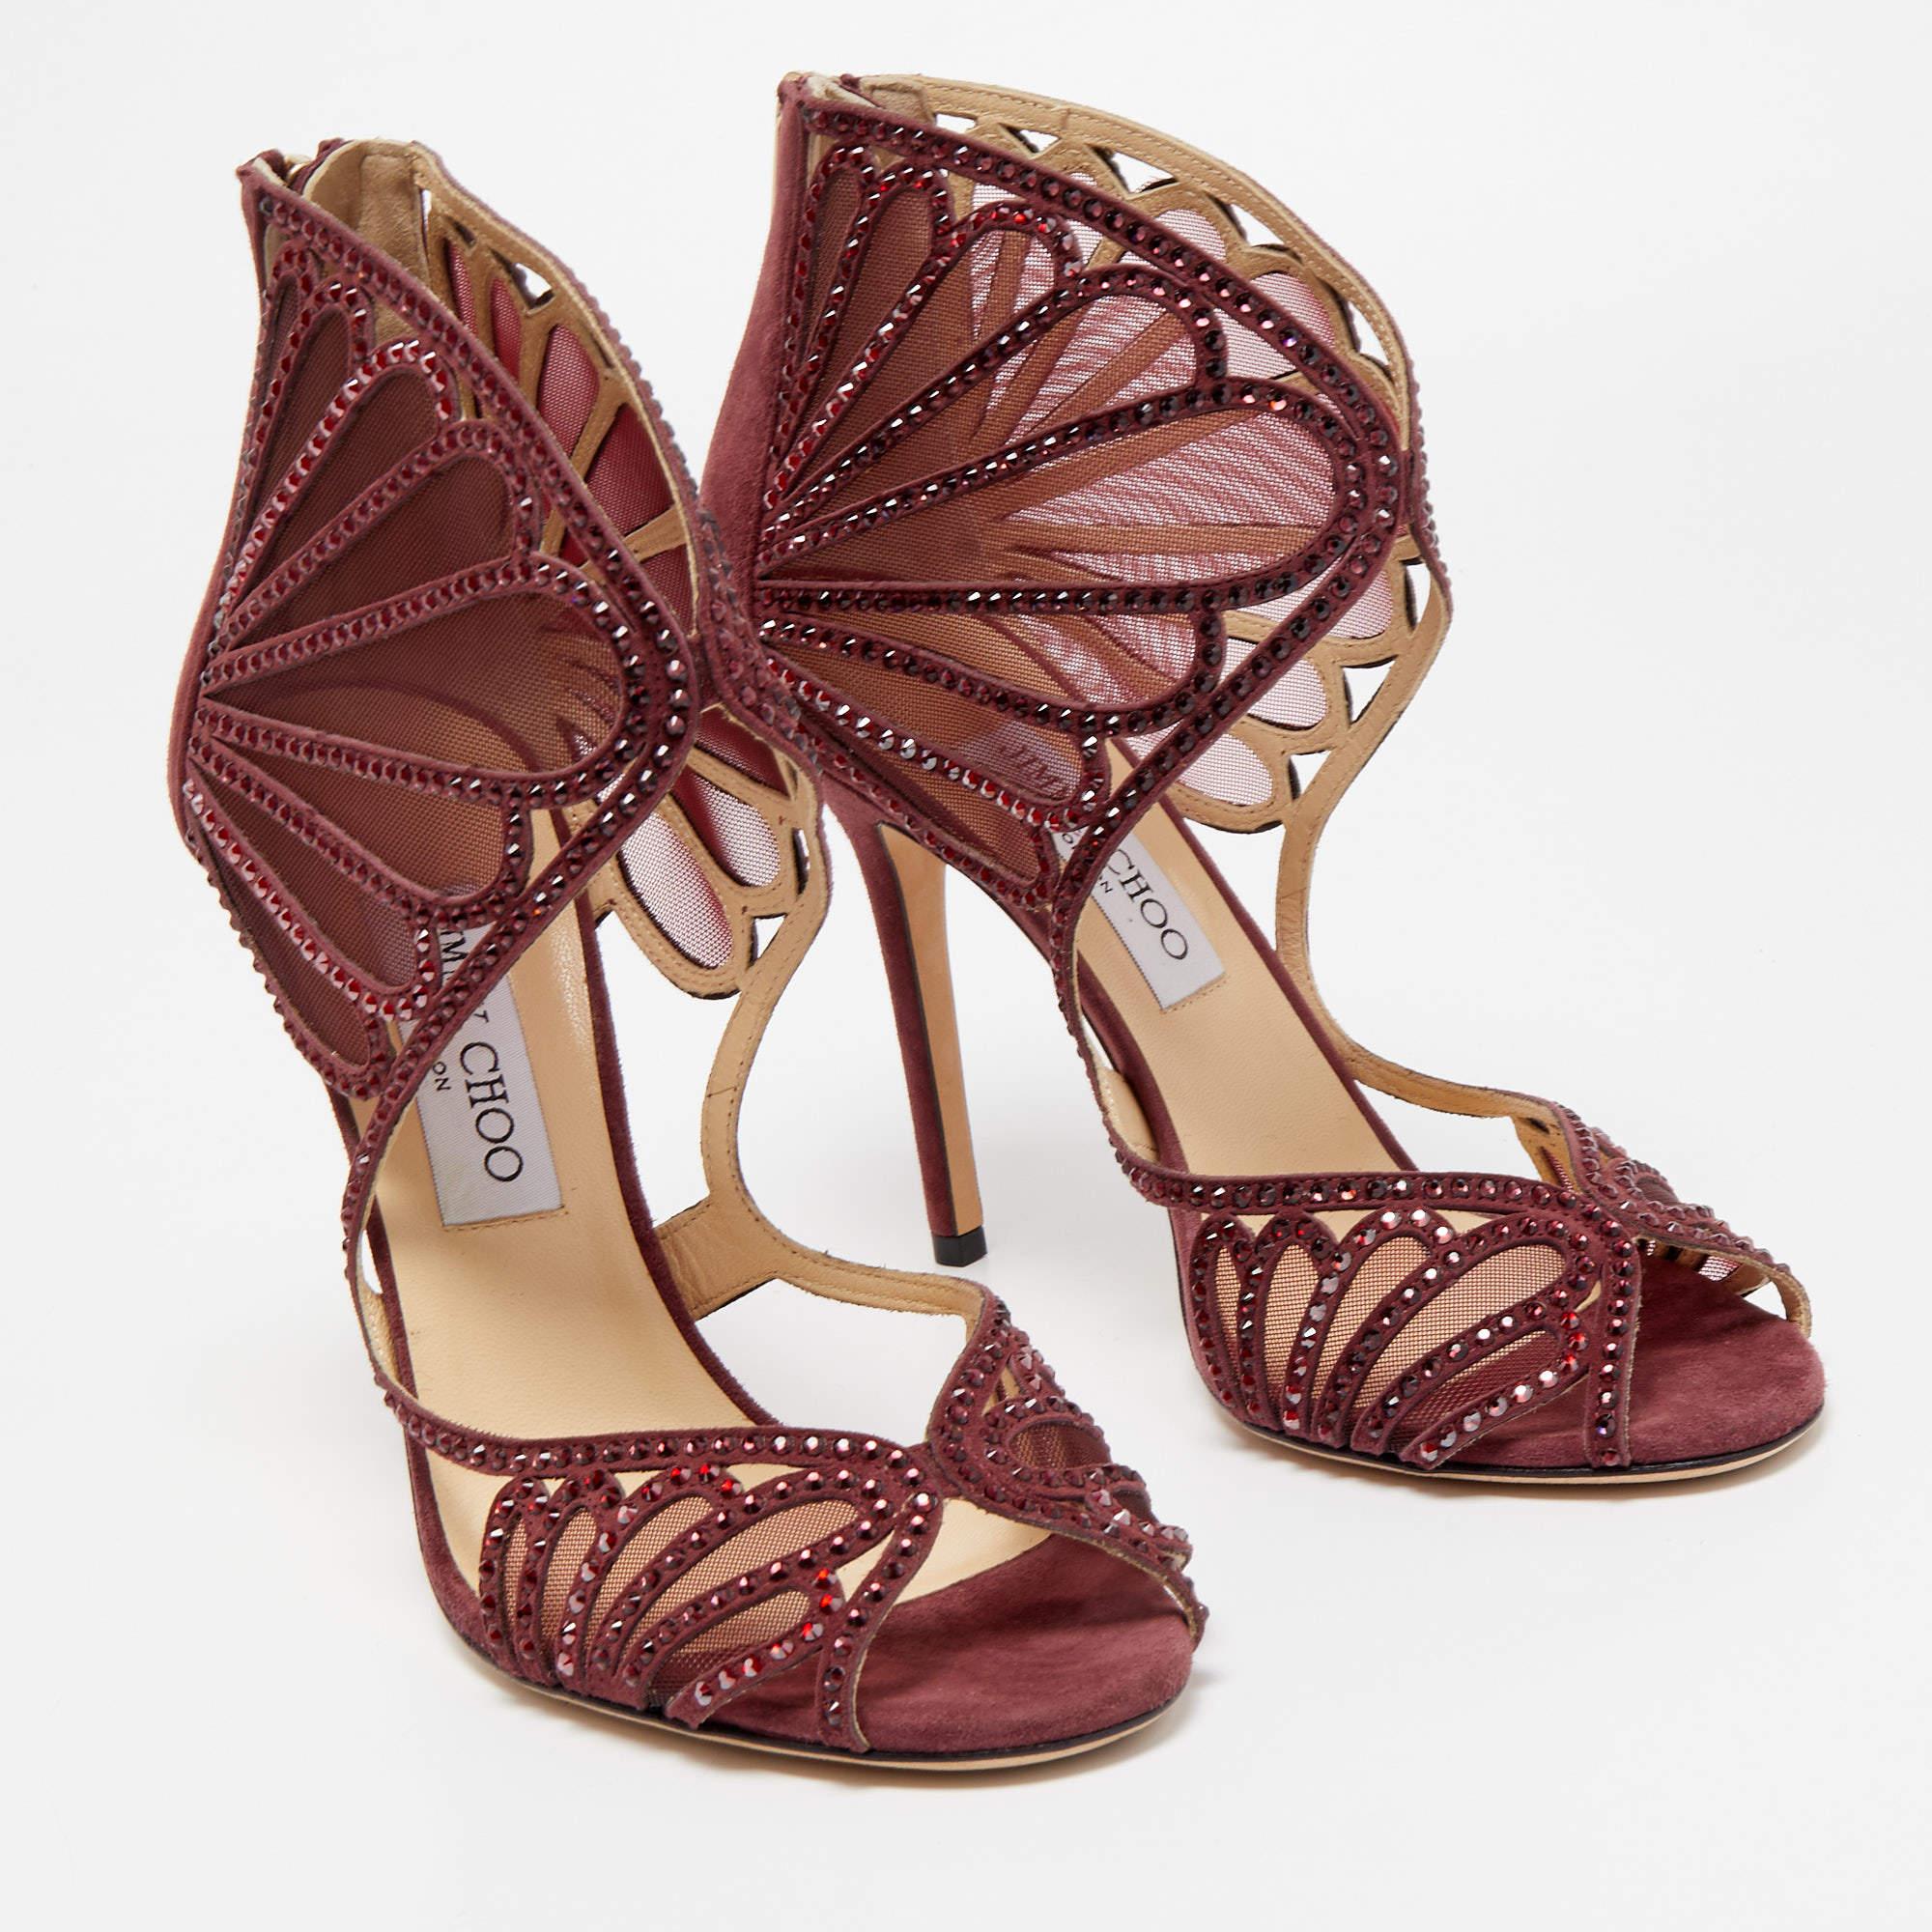 Jimmy Choo Burgundy Suede and Crystal Embellished Mesh Open Toe Sandals Size 39 1